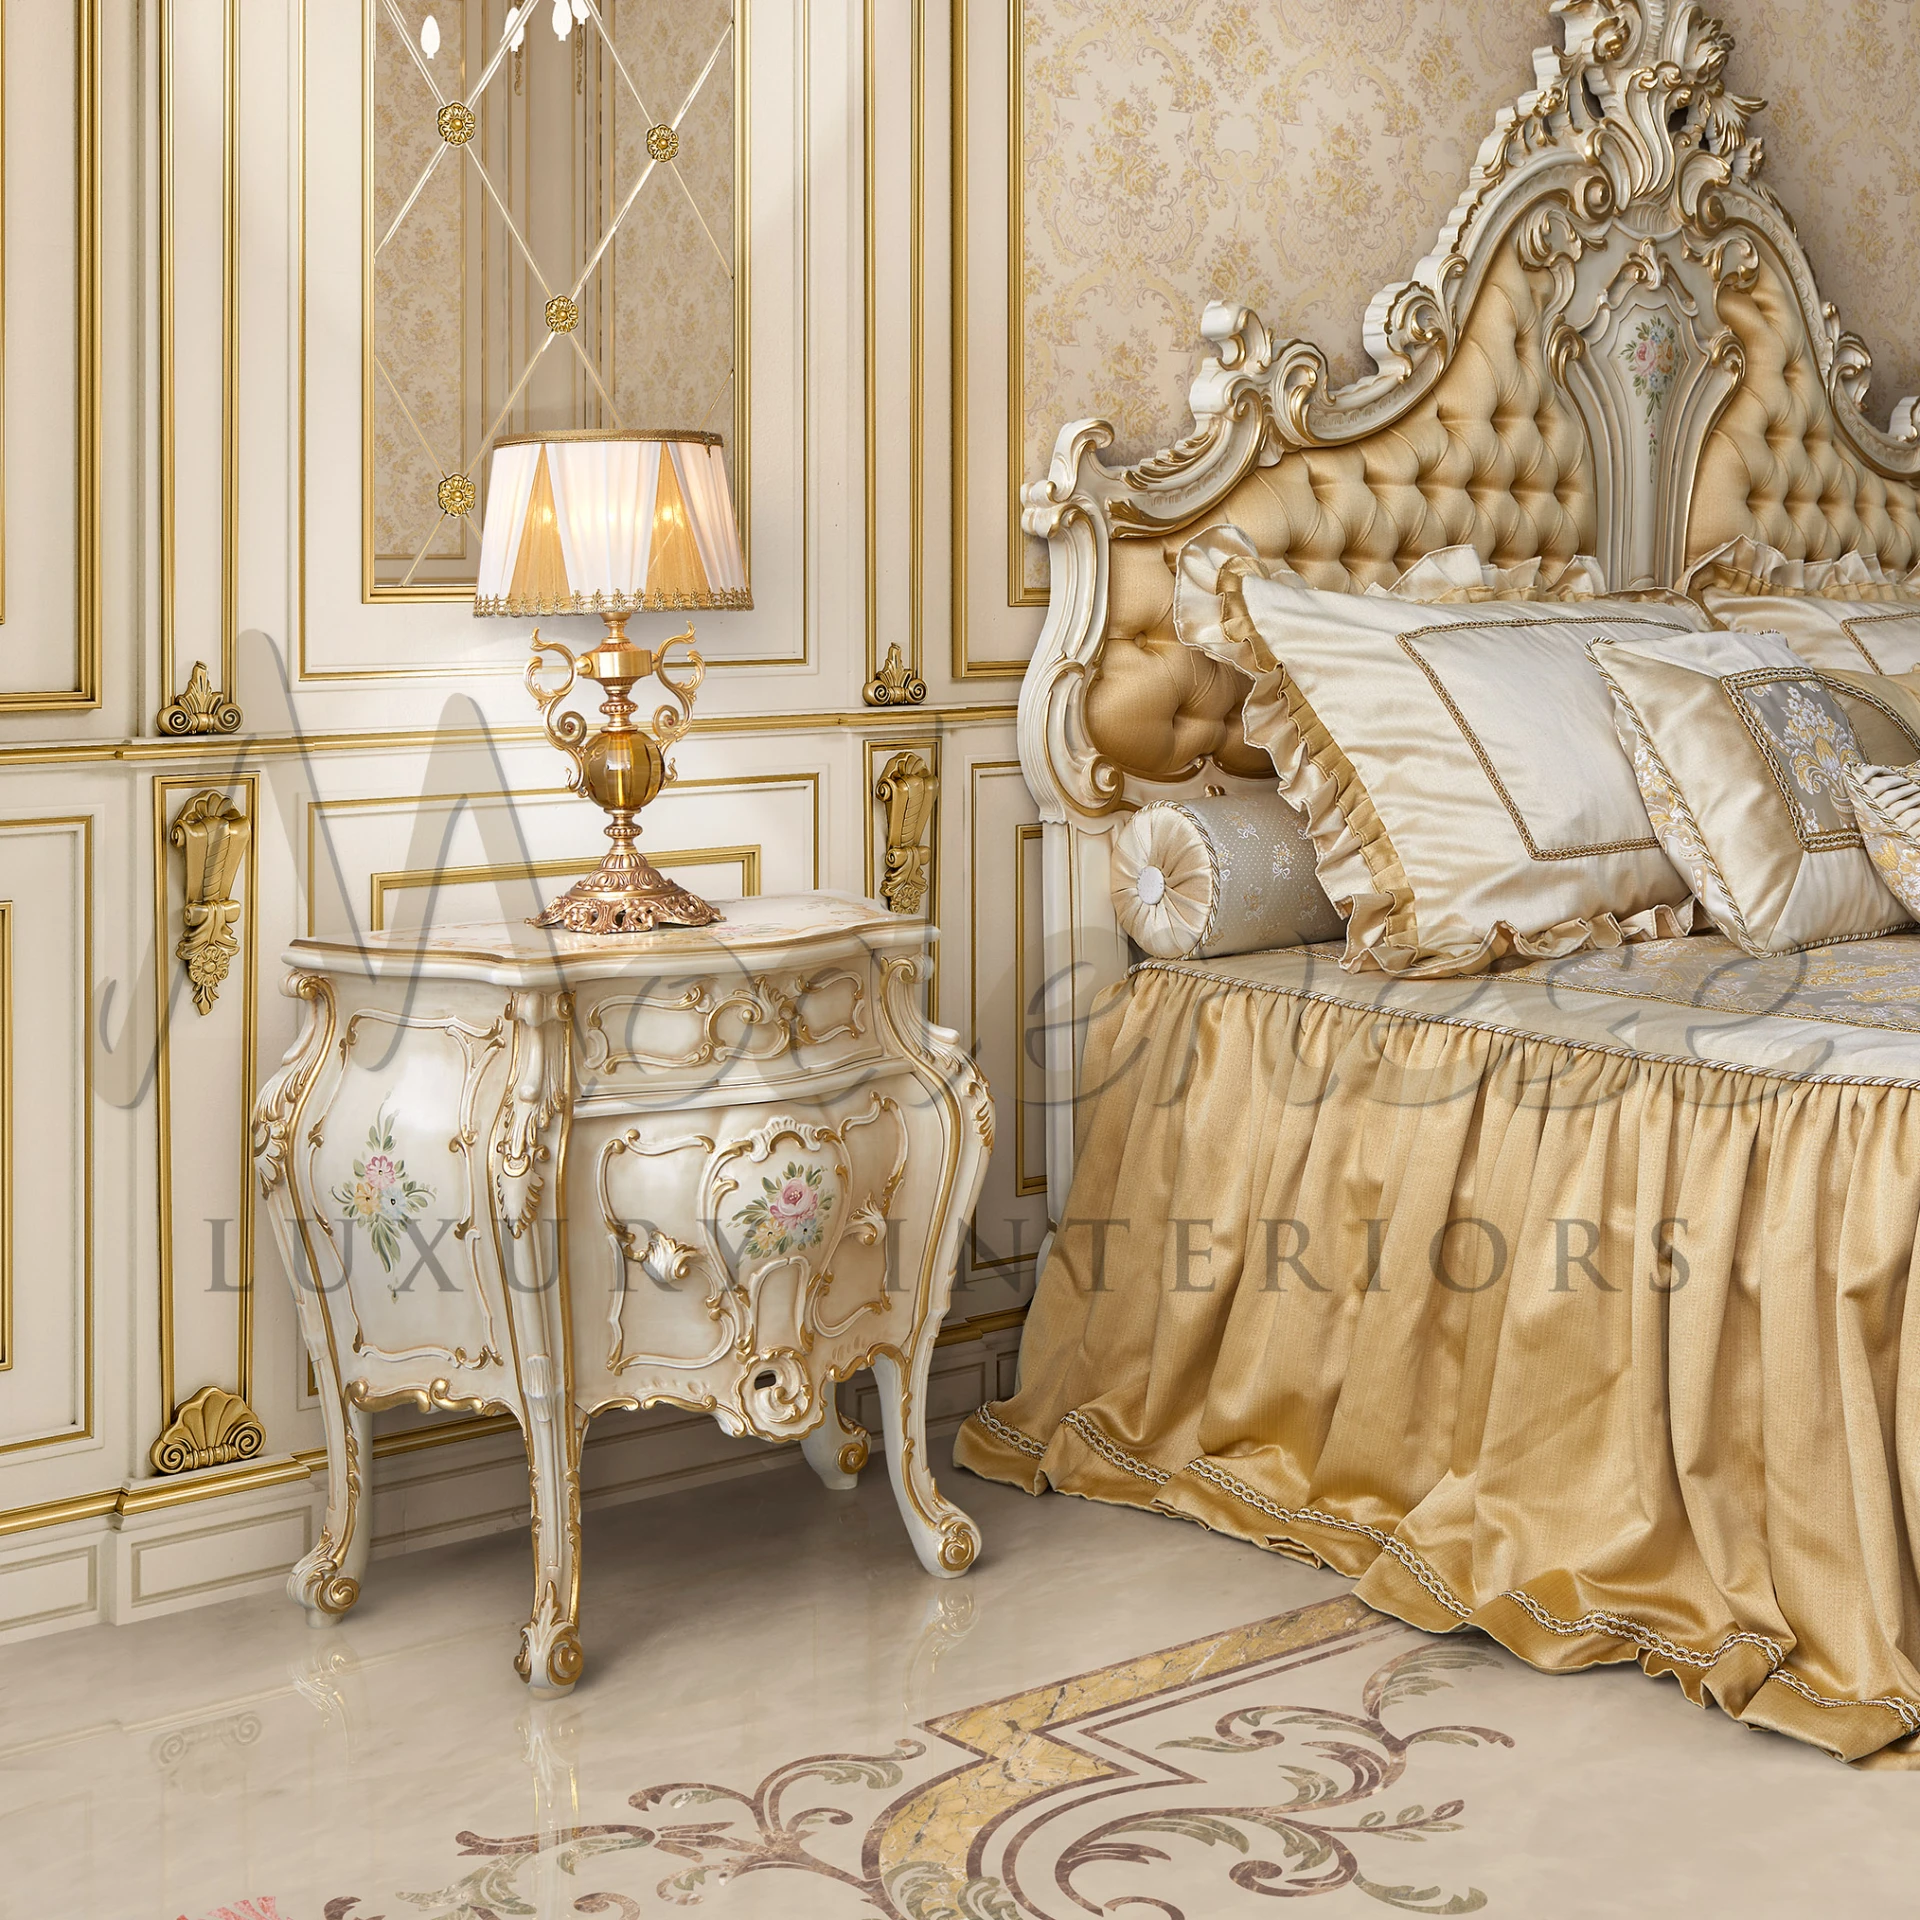 Lavish bedroom decor with a Radiance Table lamp on a carved bedside table with floral motifs.